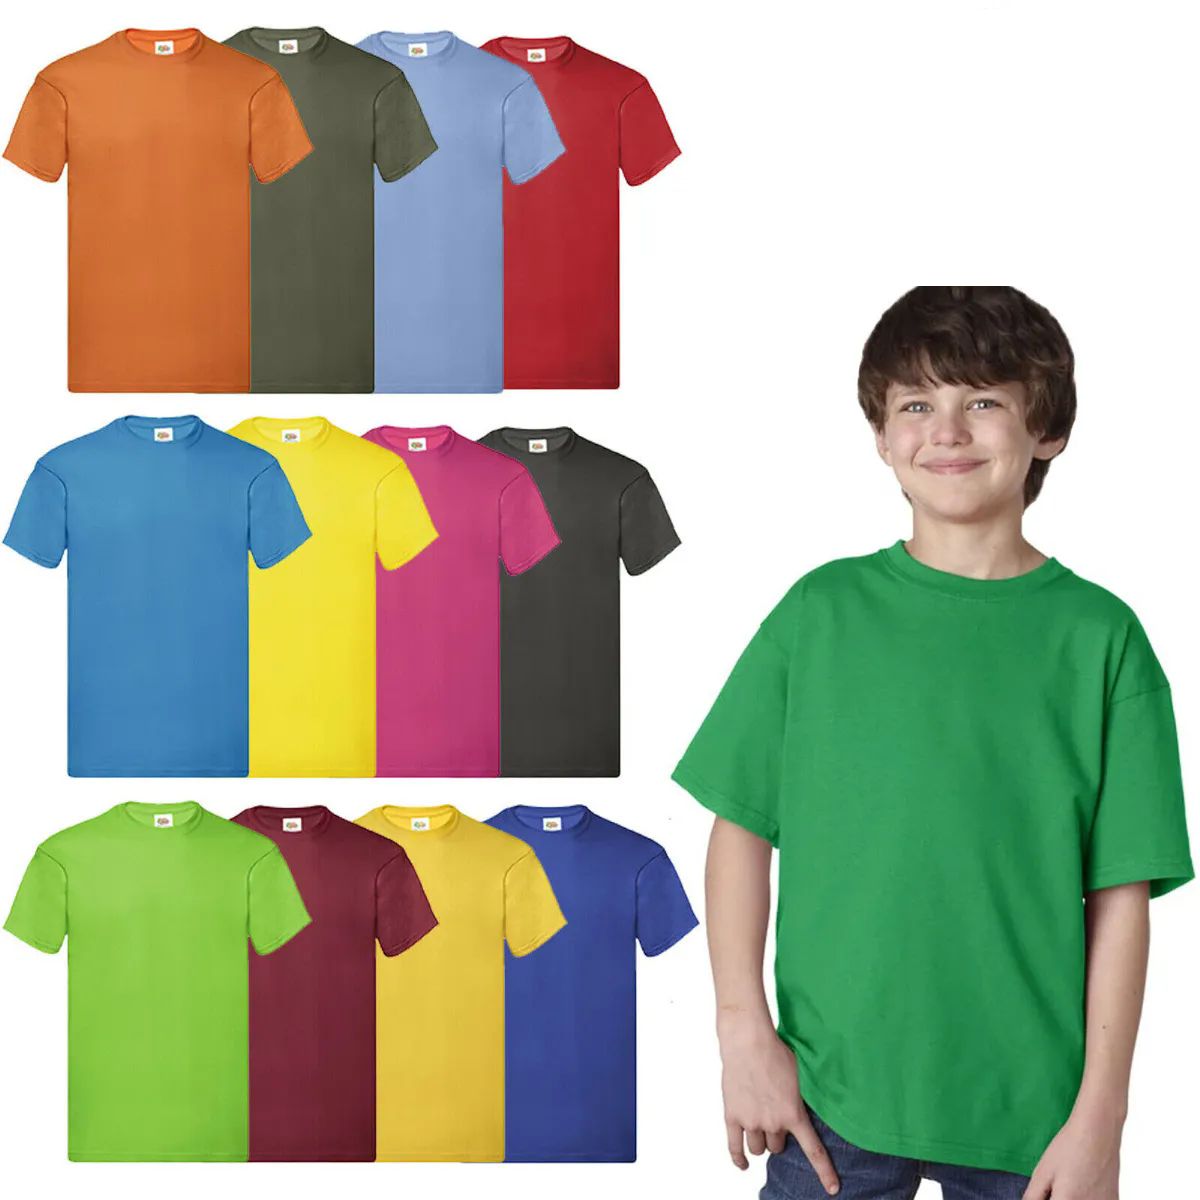 504 Pieces of Billion Hats Kids Youth Cotton Assorted Colors T Shirts Size L